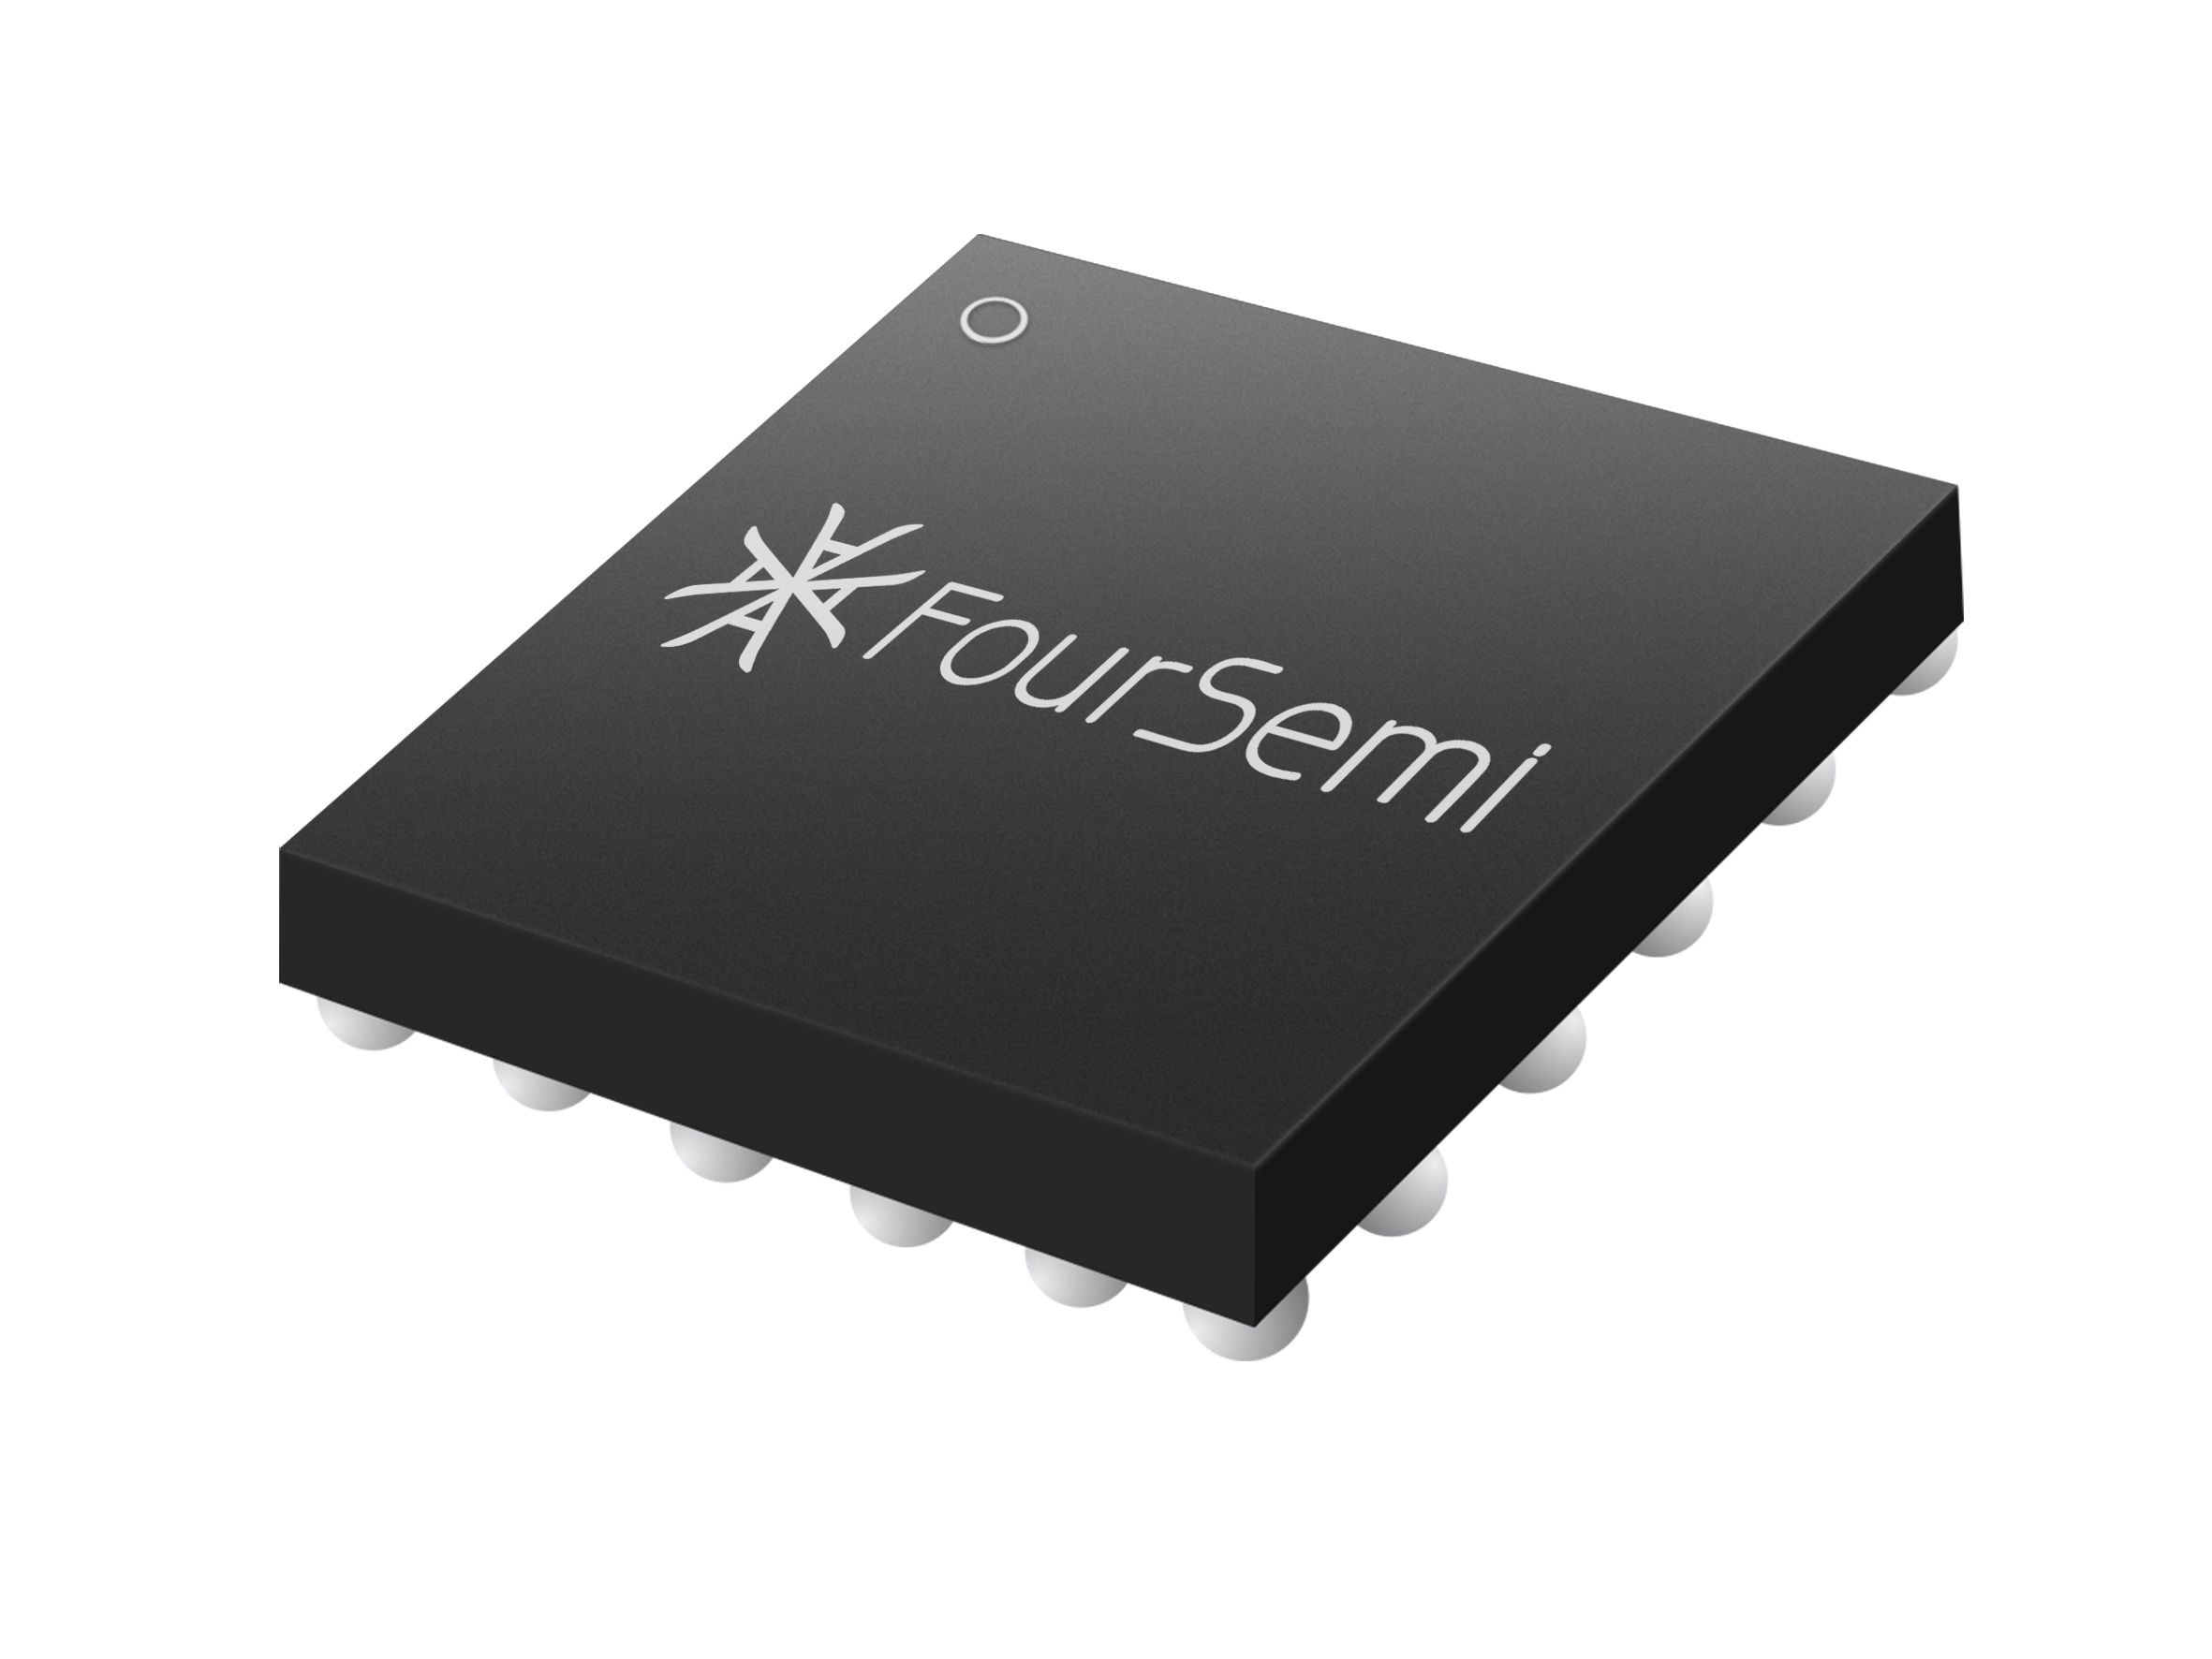 FourSemi focuses on high-performance mixed-signal IC design